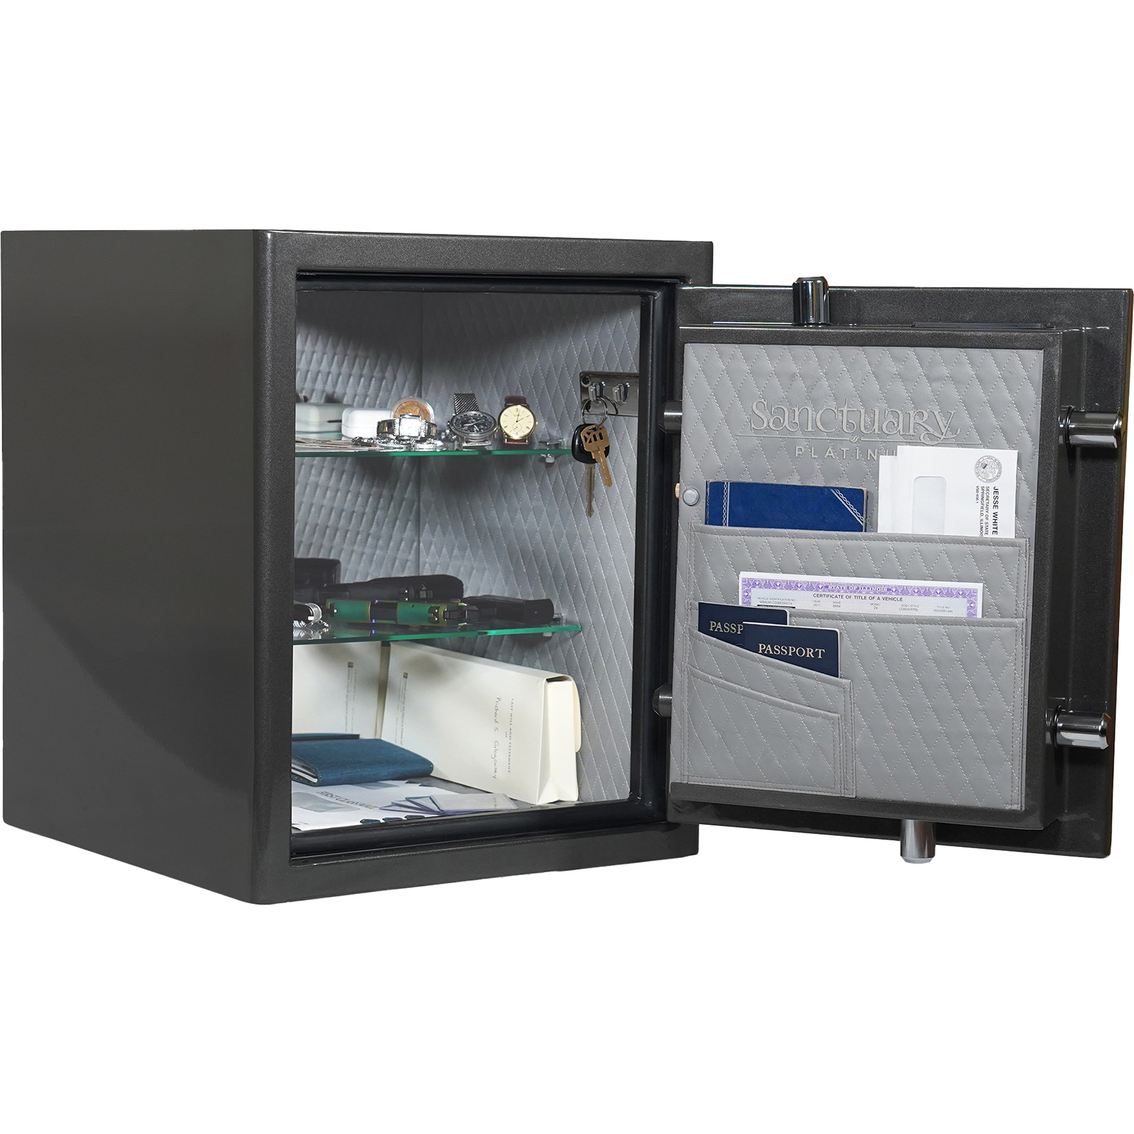 Sports Afield Sports Afield Sanctuary 23 in. Tall Safe with Biometric Lock - Image 3 of 6